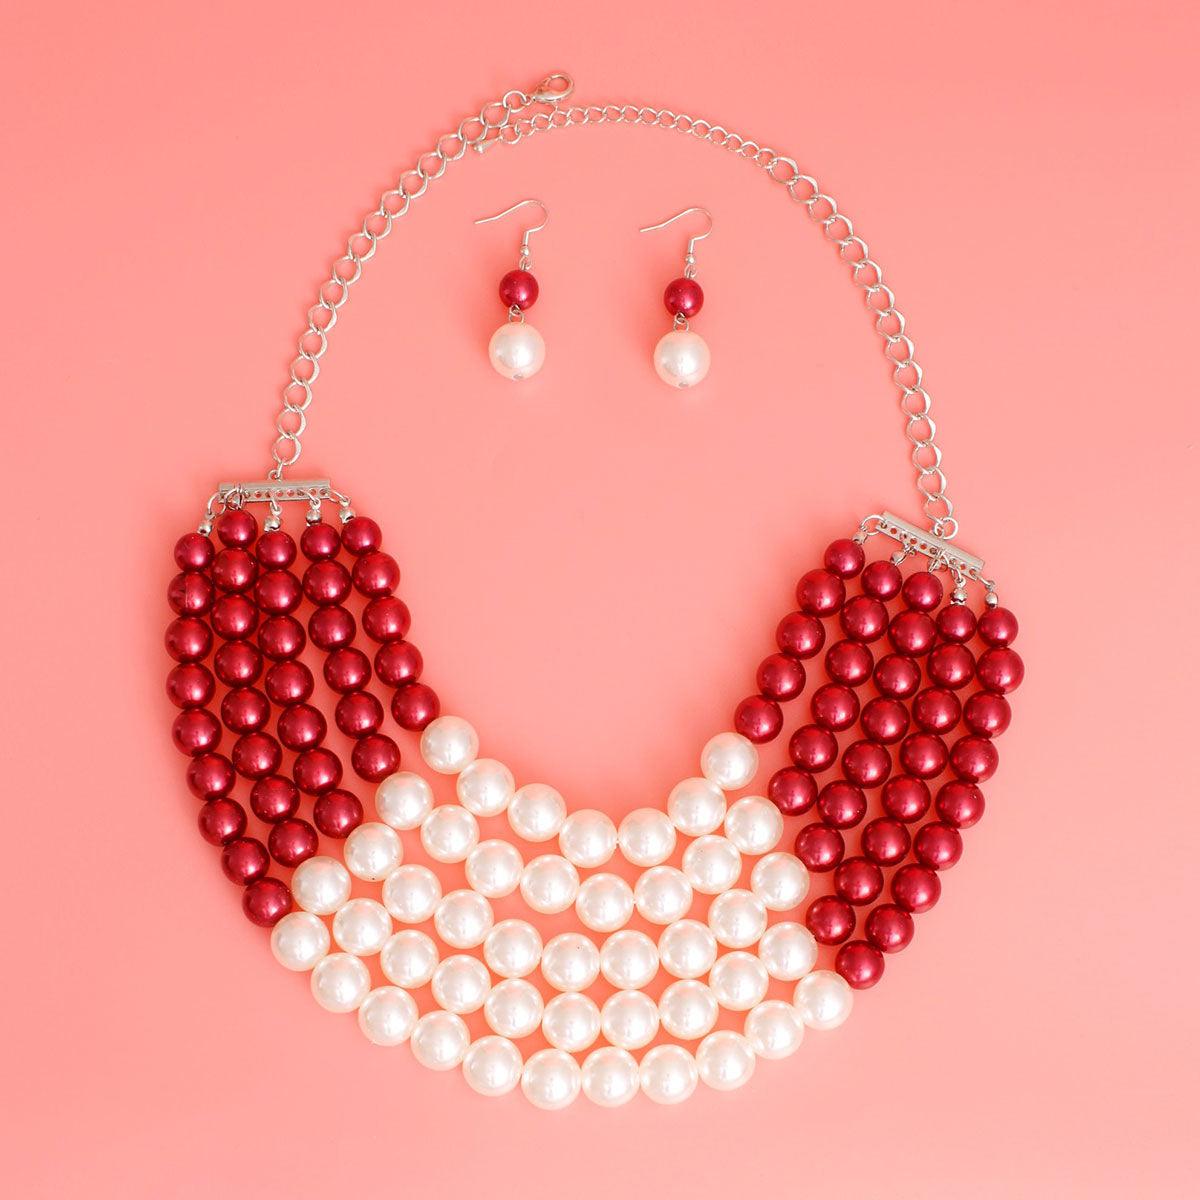 5 Strand Faux Pearl Necklace Earrings Set in Red Cream Beads